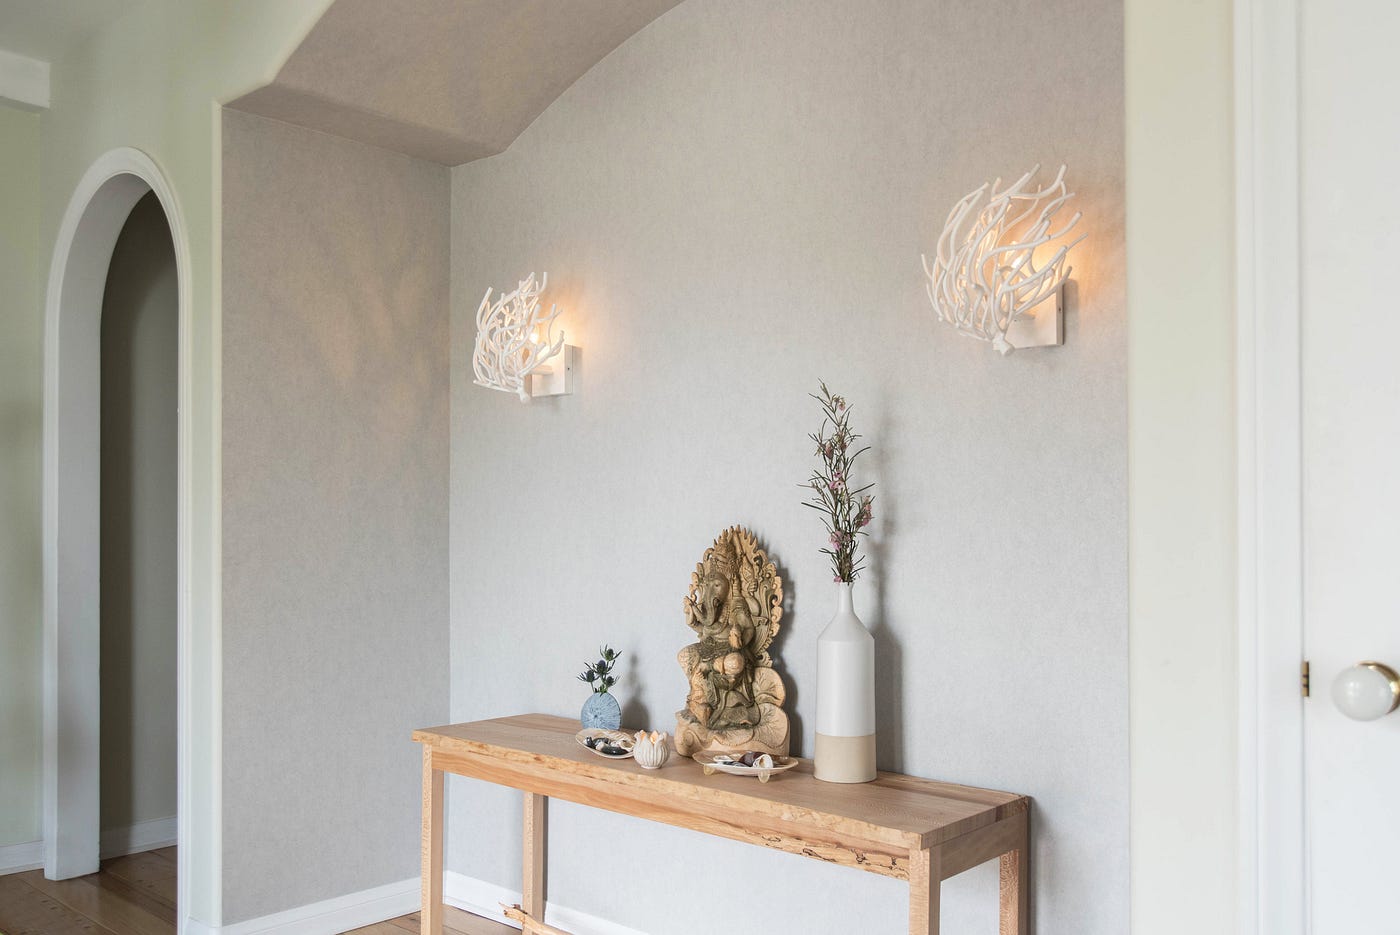 A welcoming foyer with plants and art pieces inspired by nature, like these delicate coral inspired wall sconces. There is a wooden table holding a display of vases, a figurine, and small natural objects.